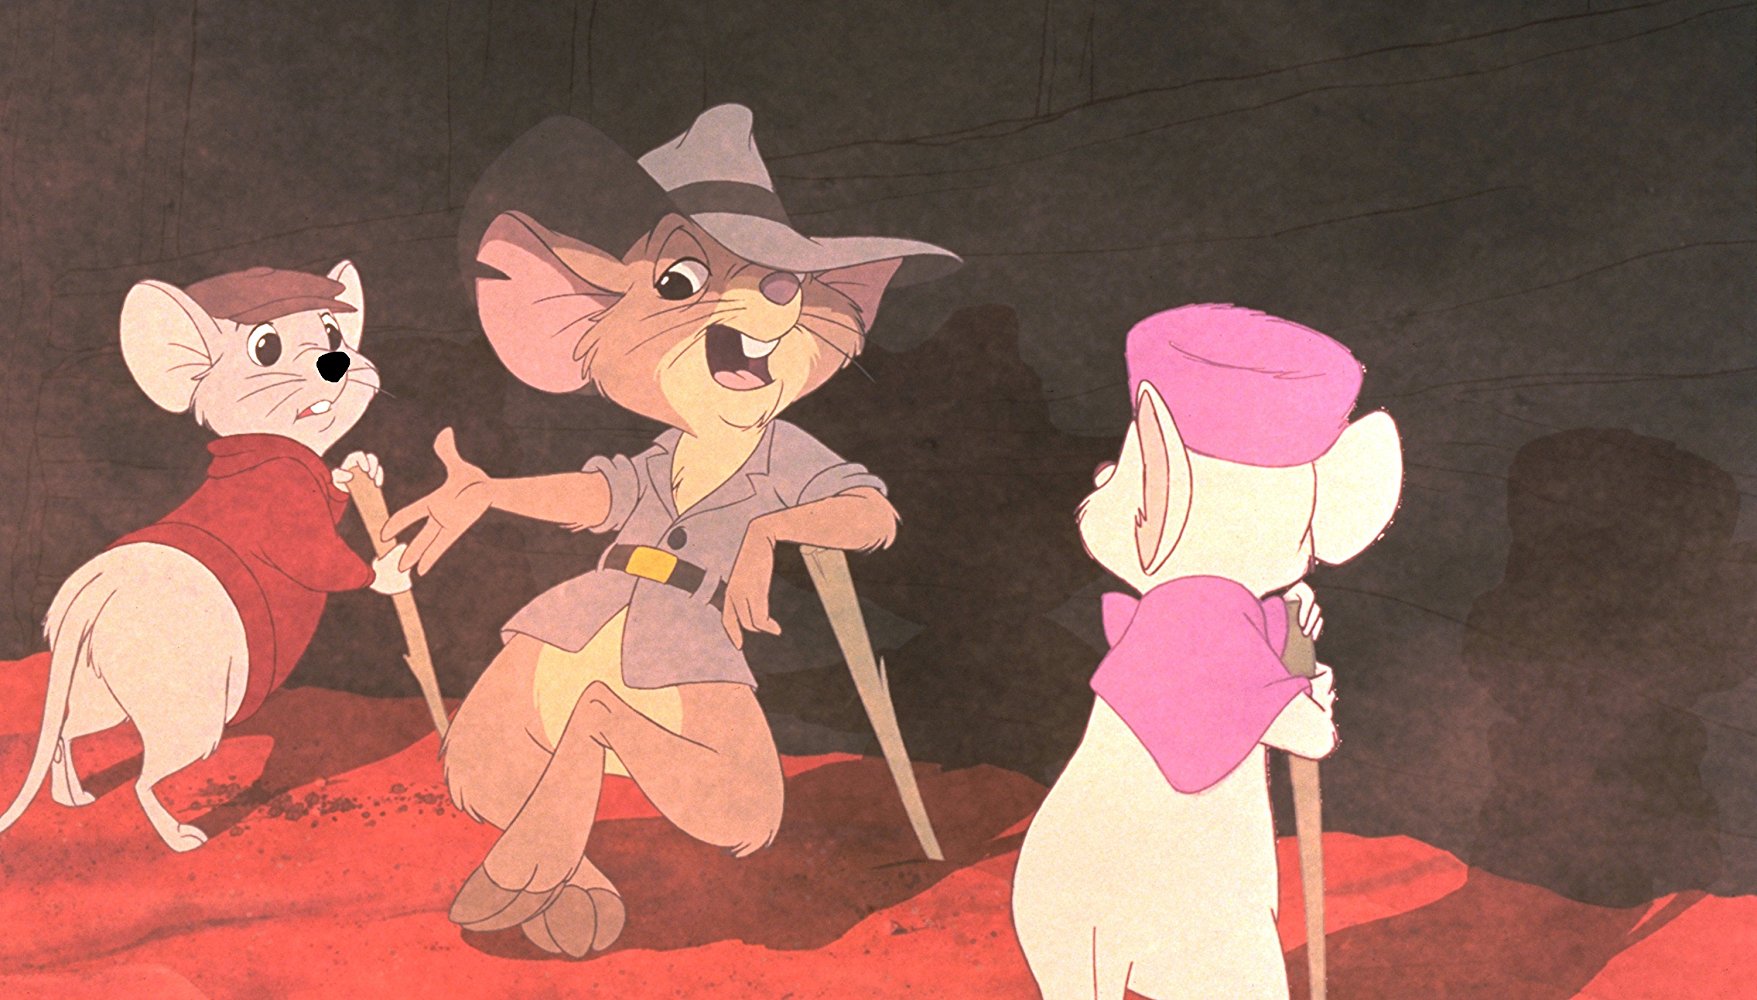 The Rescuers / The Rescuers Down Under (35th Anniversary Edition) (Blu-ray + DVD), Walt Disney Video, Kids & Family - image 3 of 5